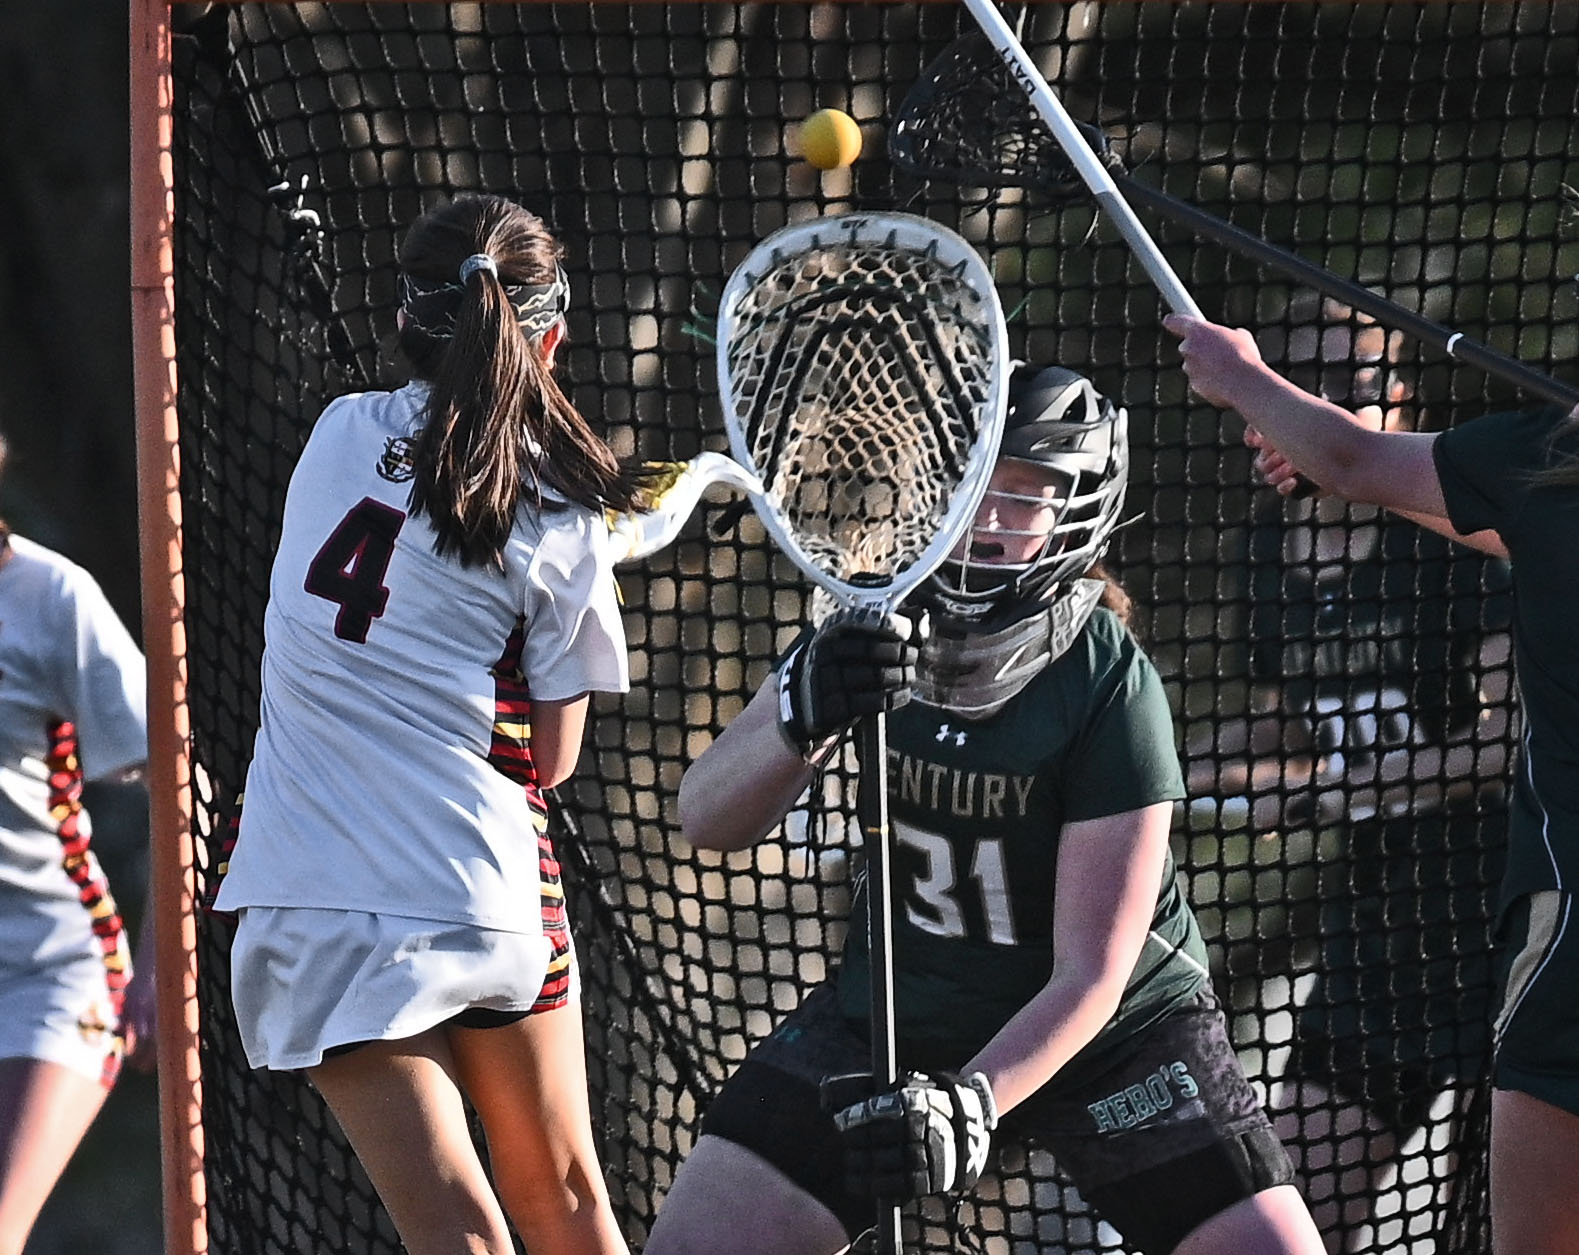 Dulaney girls lacrosse primed for Baltimore County rivals